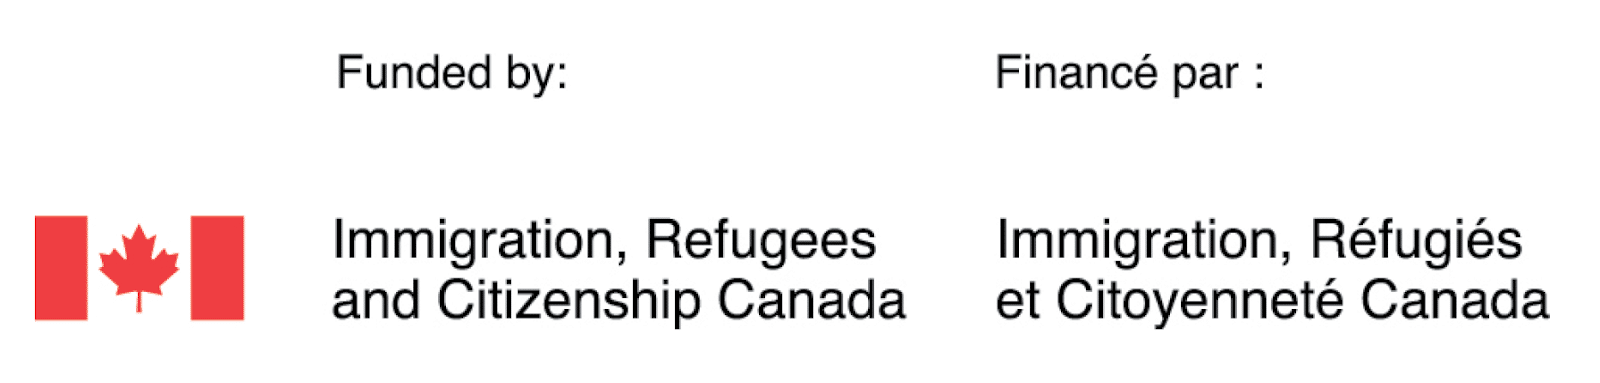 Funded by Immigration, Refugees, and Citizenship Canada